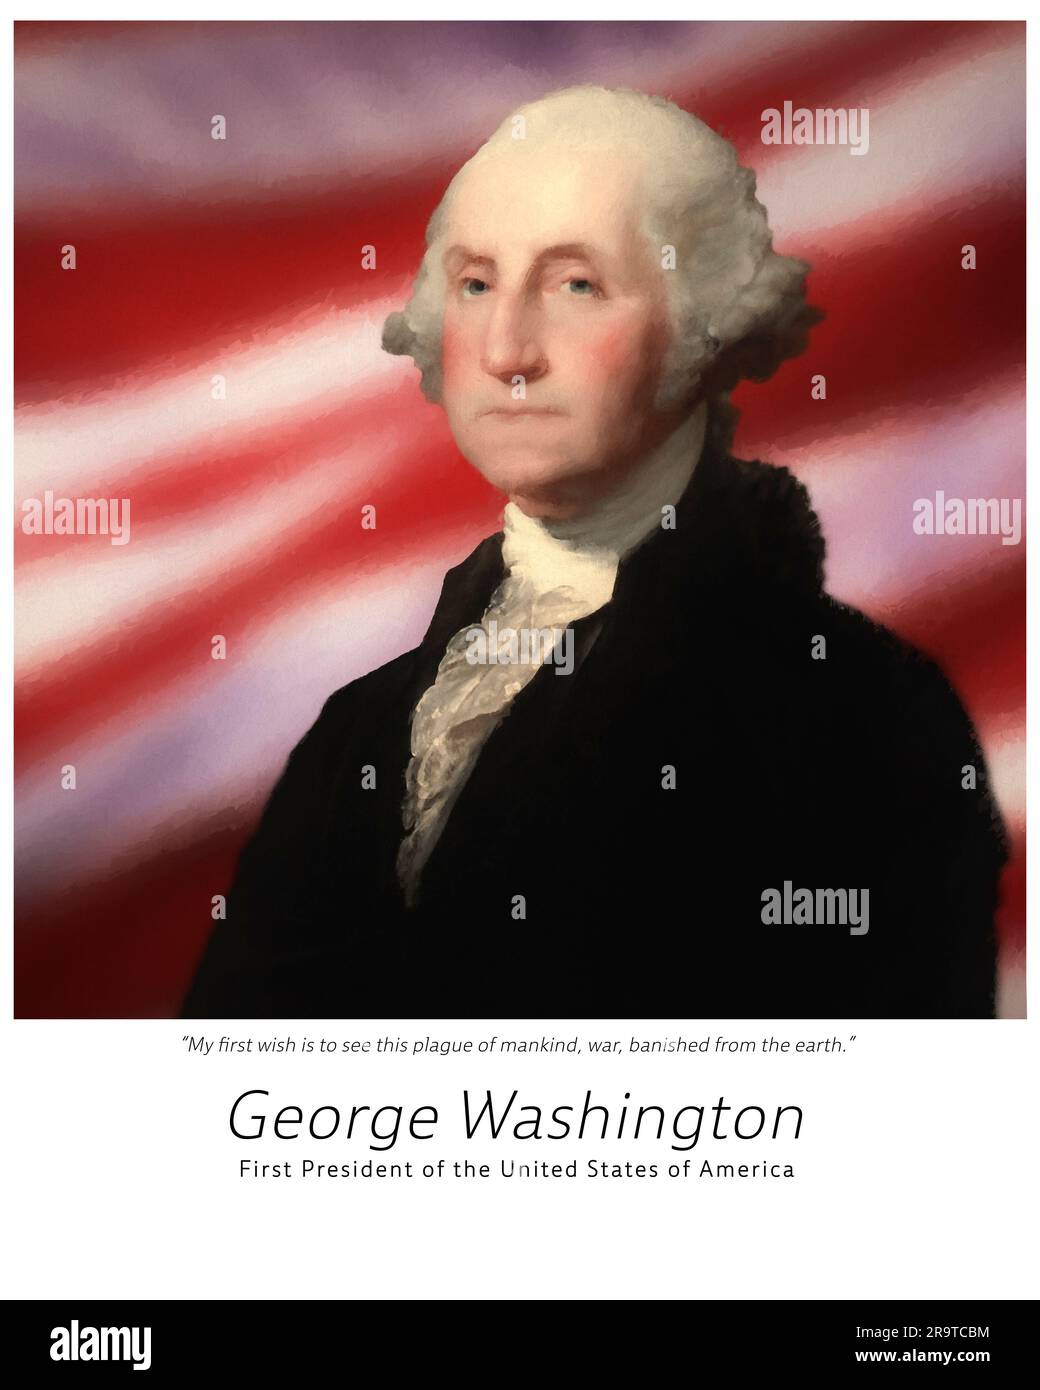 Portrait of George Washington, First President of the United States of America Stock Photo